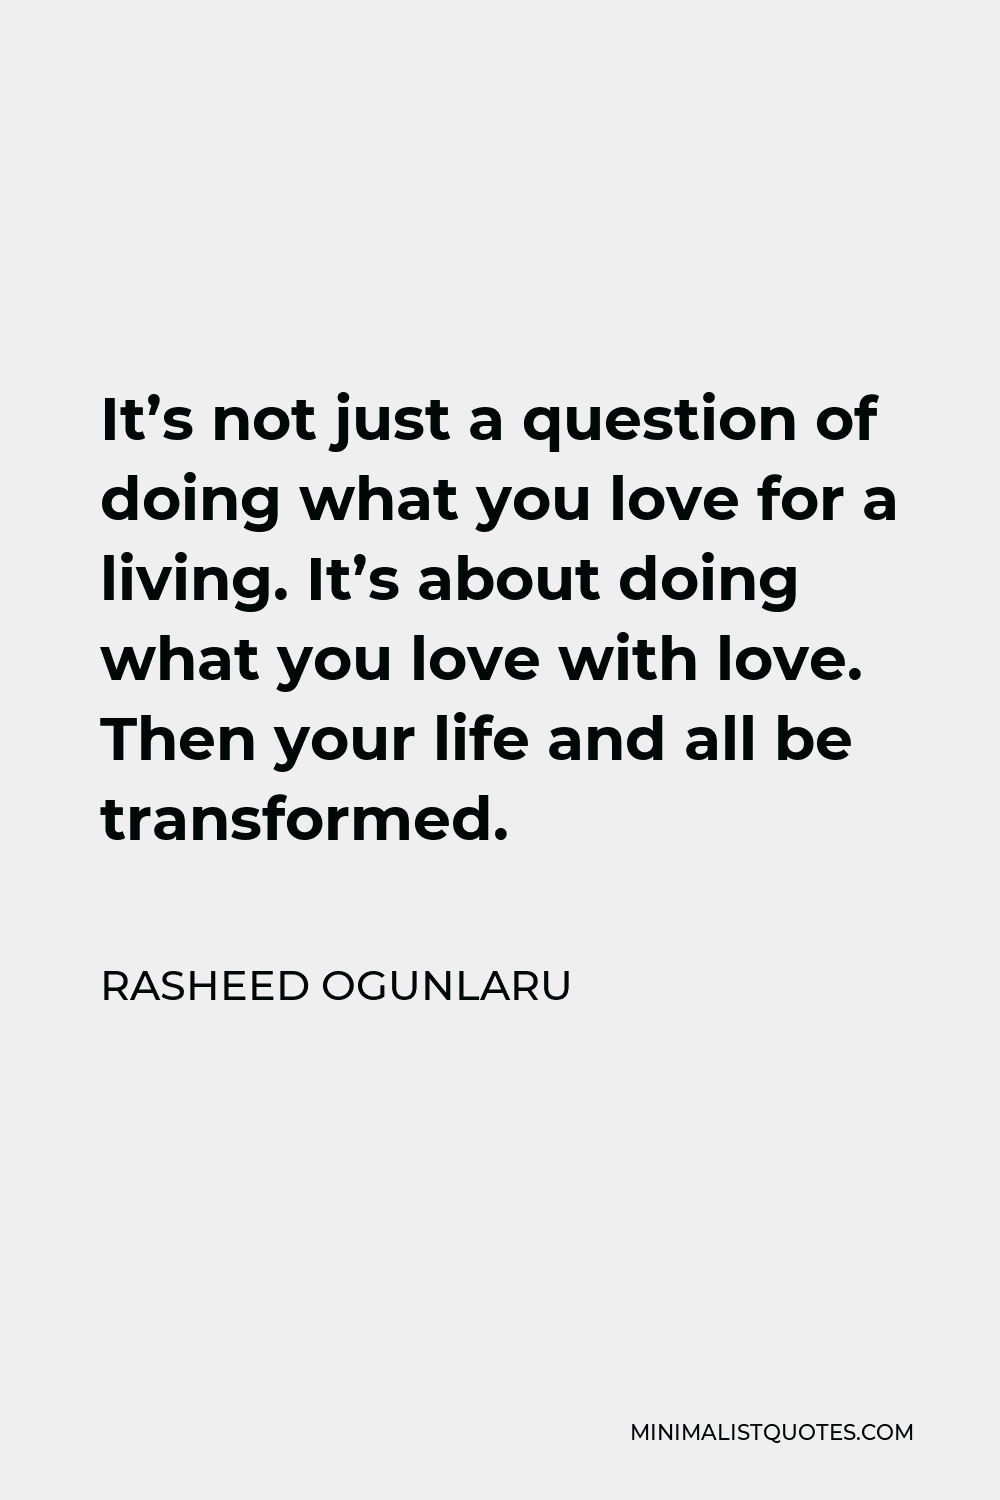 Rasheed Ogunlaru Quote - It’s not just a question of doing what you love for a living. It’s about doing what you love with love. Then your life and all be transformed.